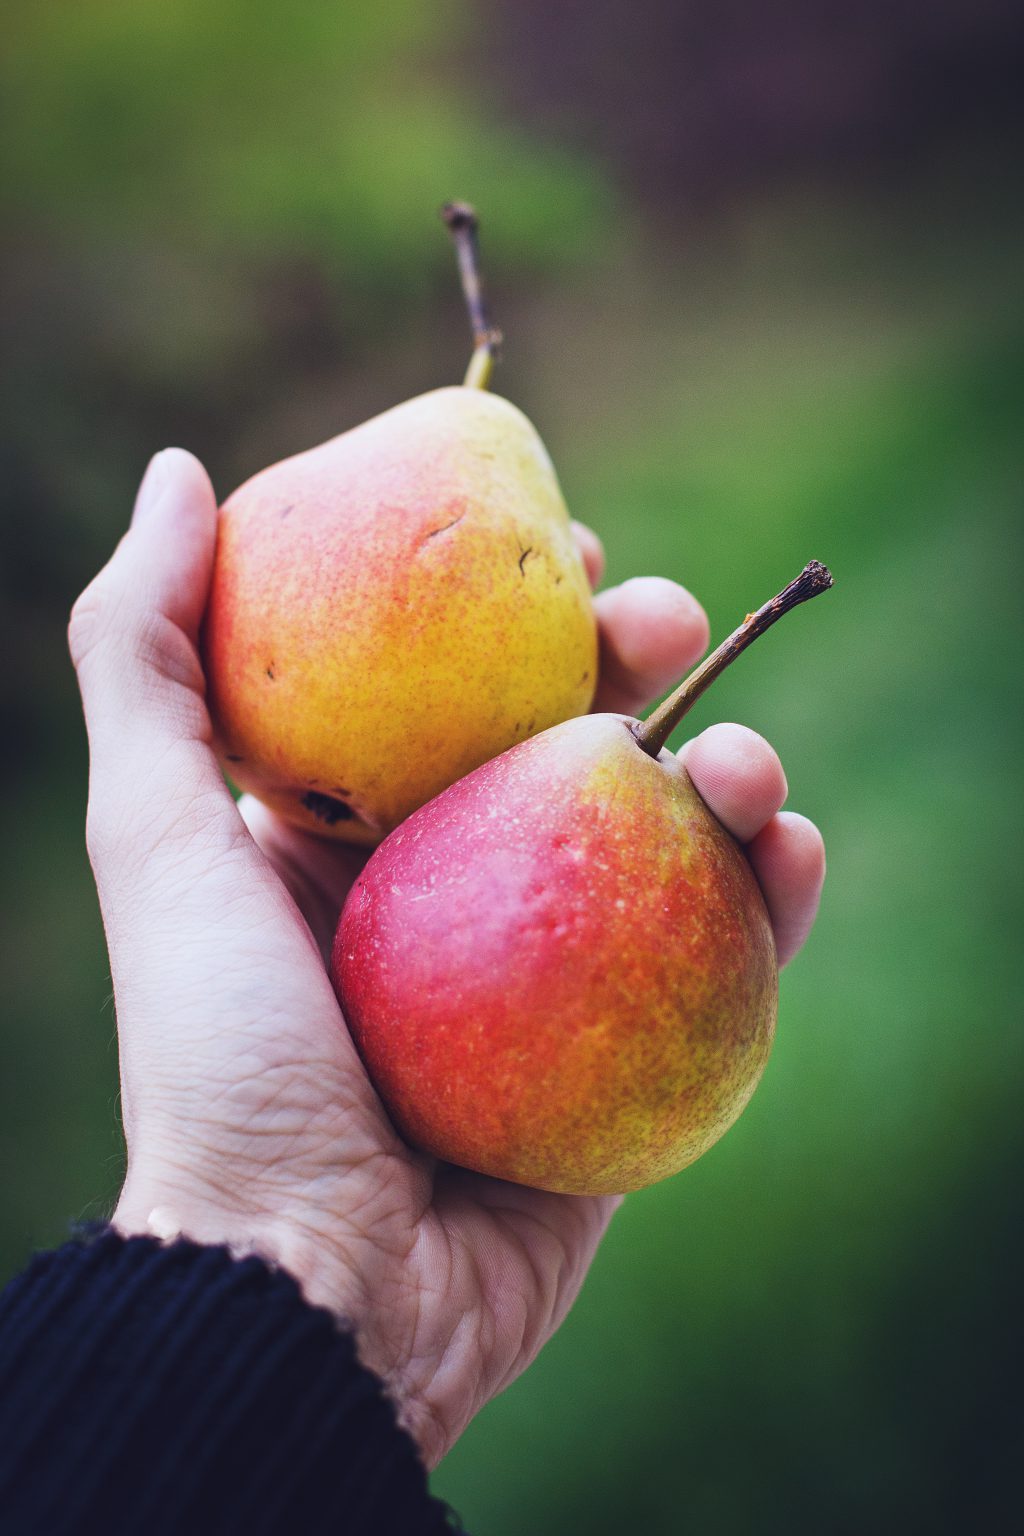 Hand holding pears - free stock photo